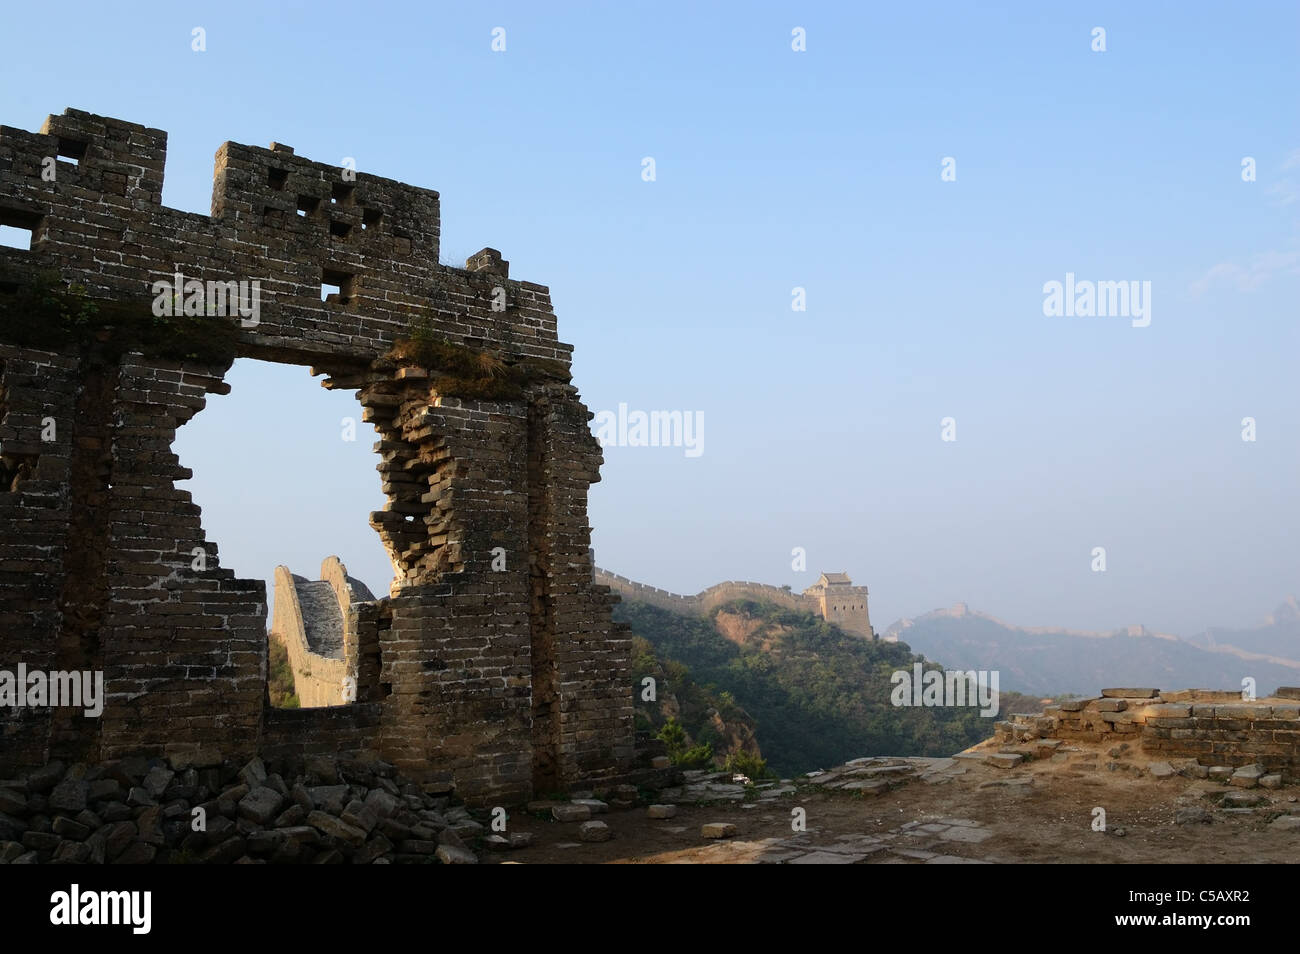 Dilapidated Great Wall of China in Jinshanling, Hebei Province, China Stock Photo